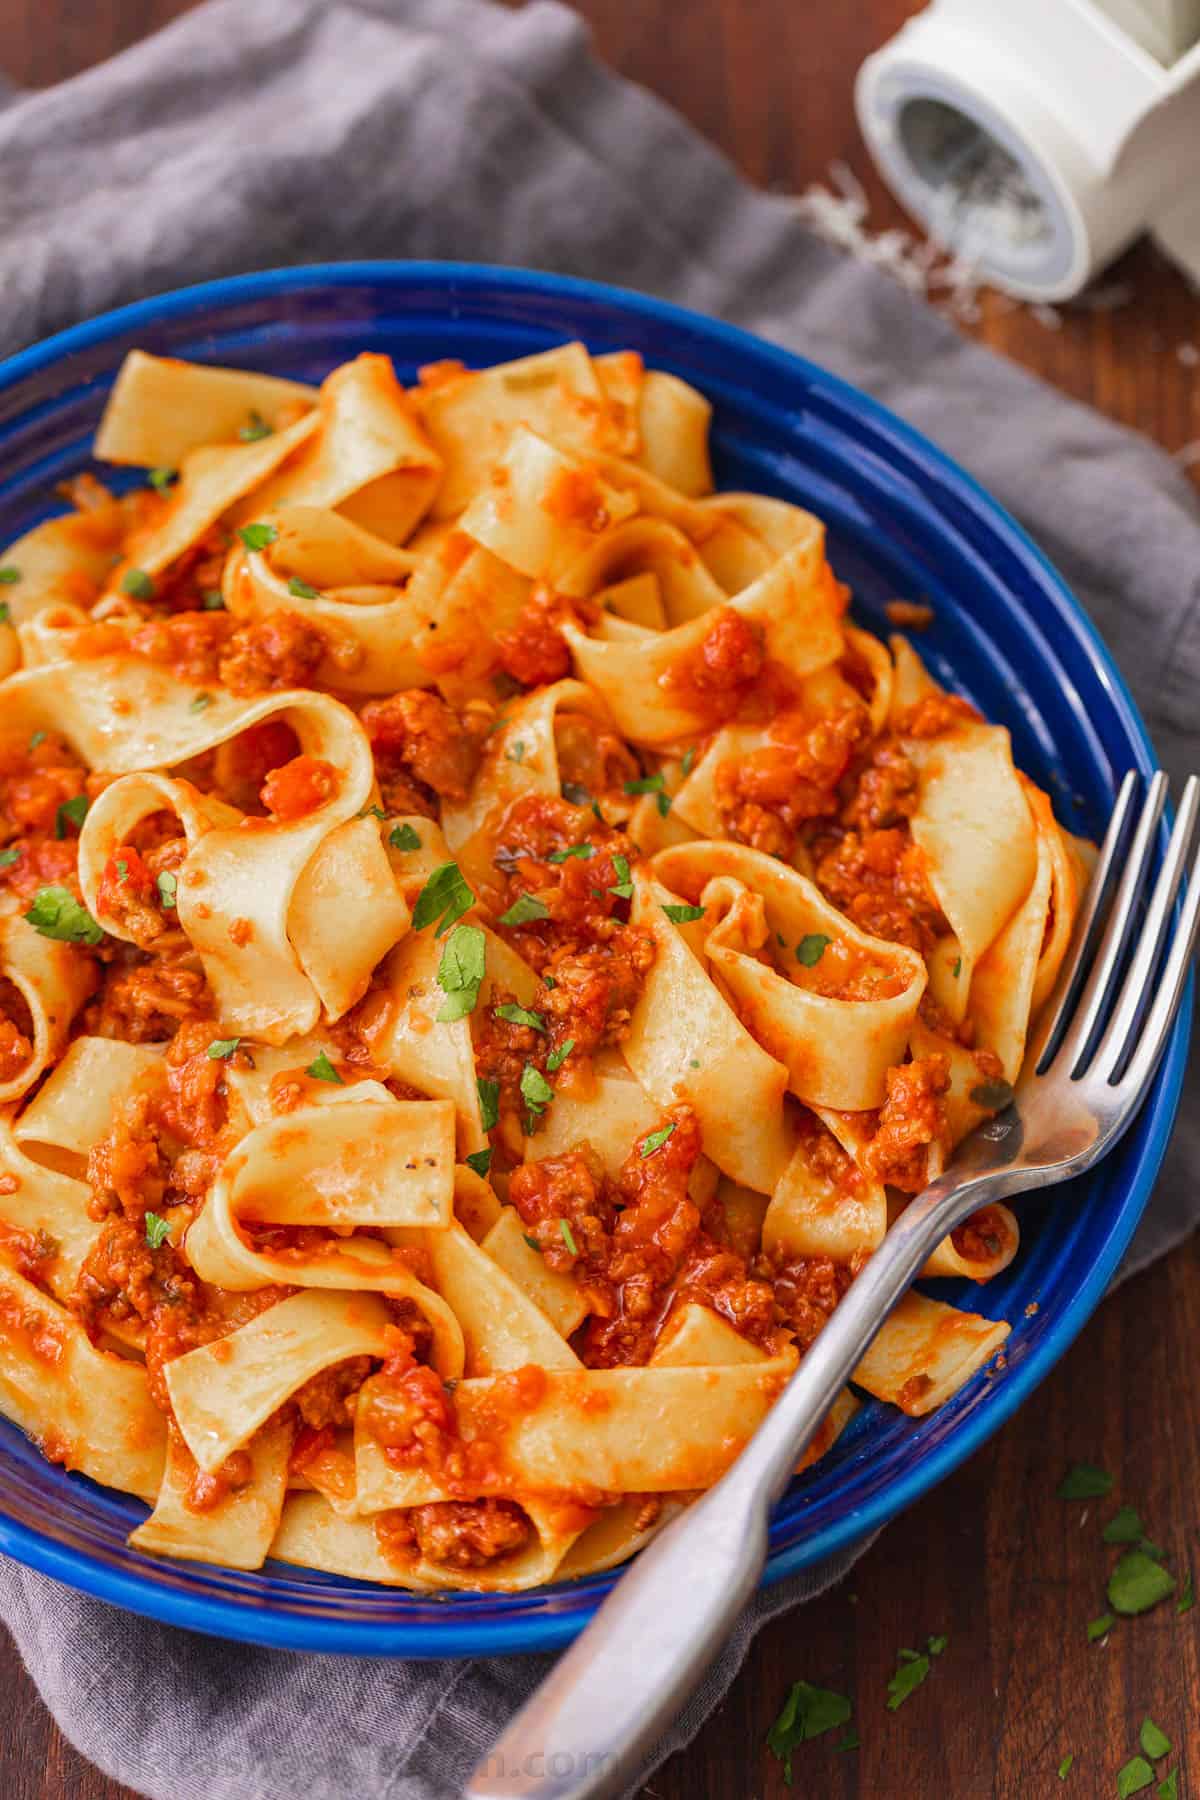 Pappardelle pasta with bolognese sauce in a blue bowl, with a fork.